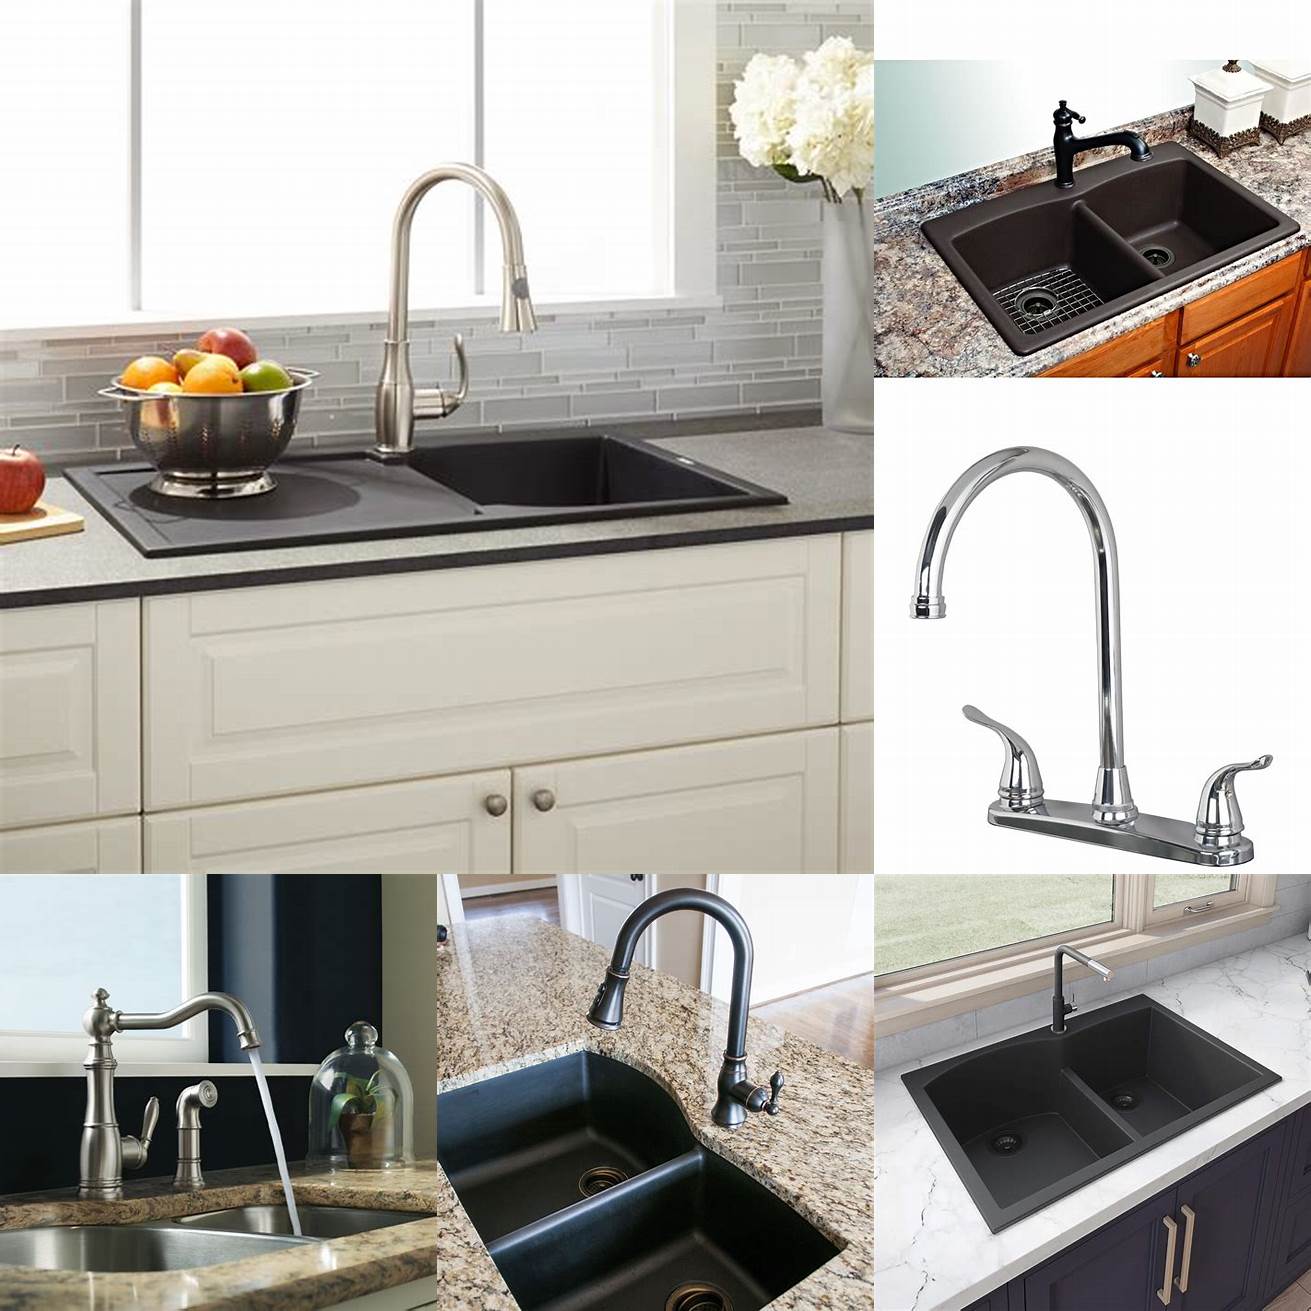 Image of a composite kitchen sink with a high-arc faucet